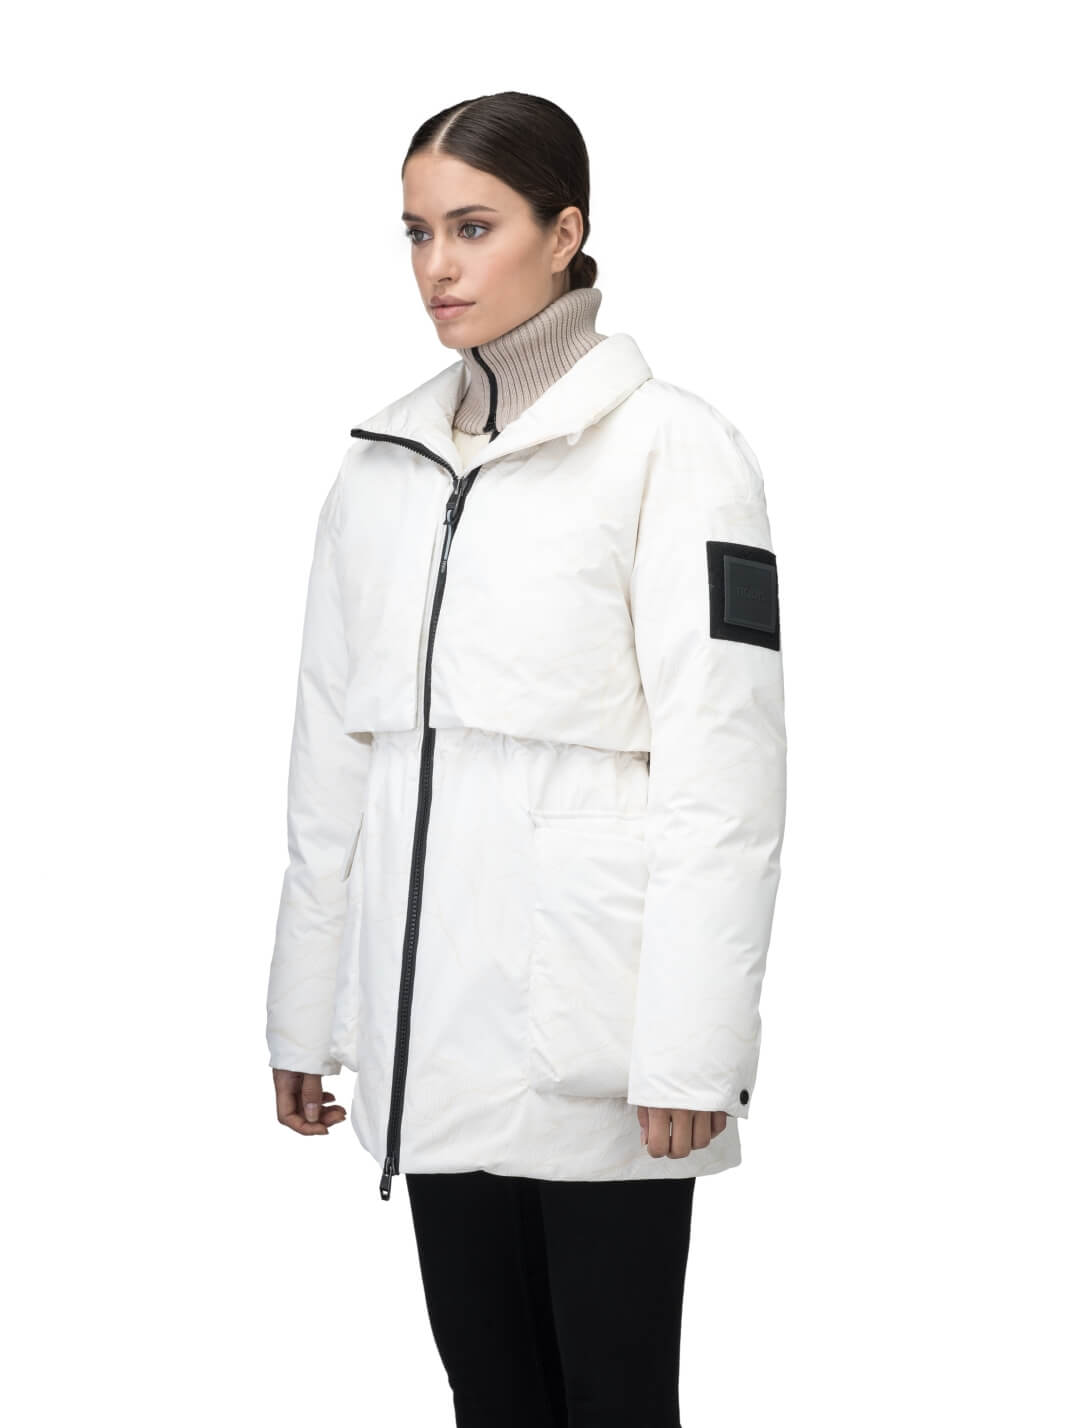 Haelyn Ladies Short Utility Parka in thigh length, 3-Ply Micro Denier fabrication, Premium Canadian White Duck Down insulation, removable down-filled hood, two-way centre front zipper, hidden adjustable cord at waist, adjustable snap cuffs, and four exterior patch pockets at front, in Wheat Desert